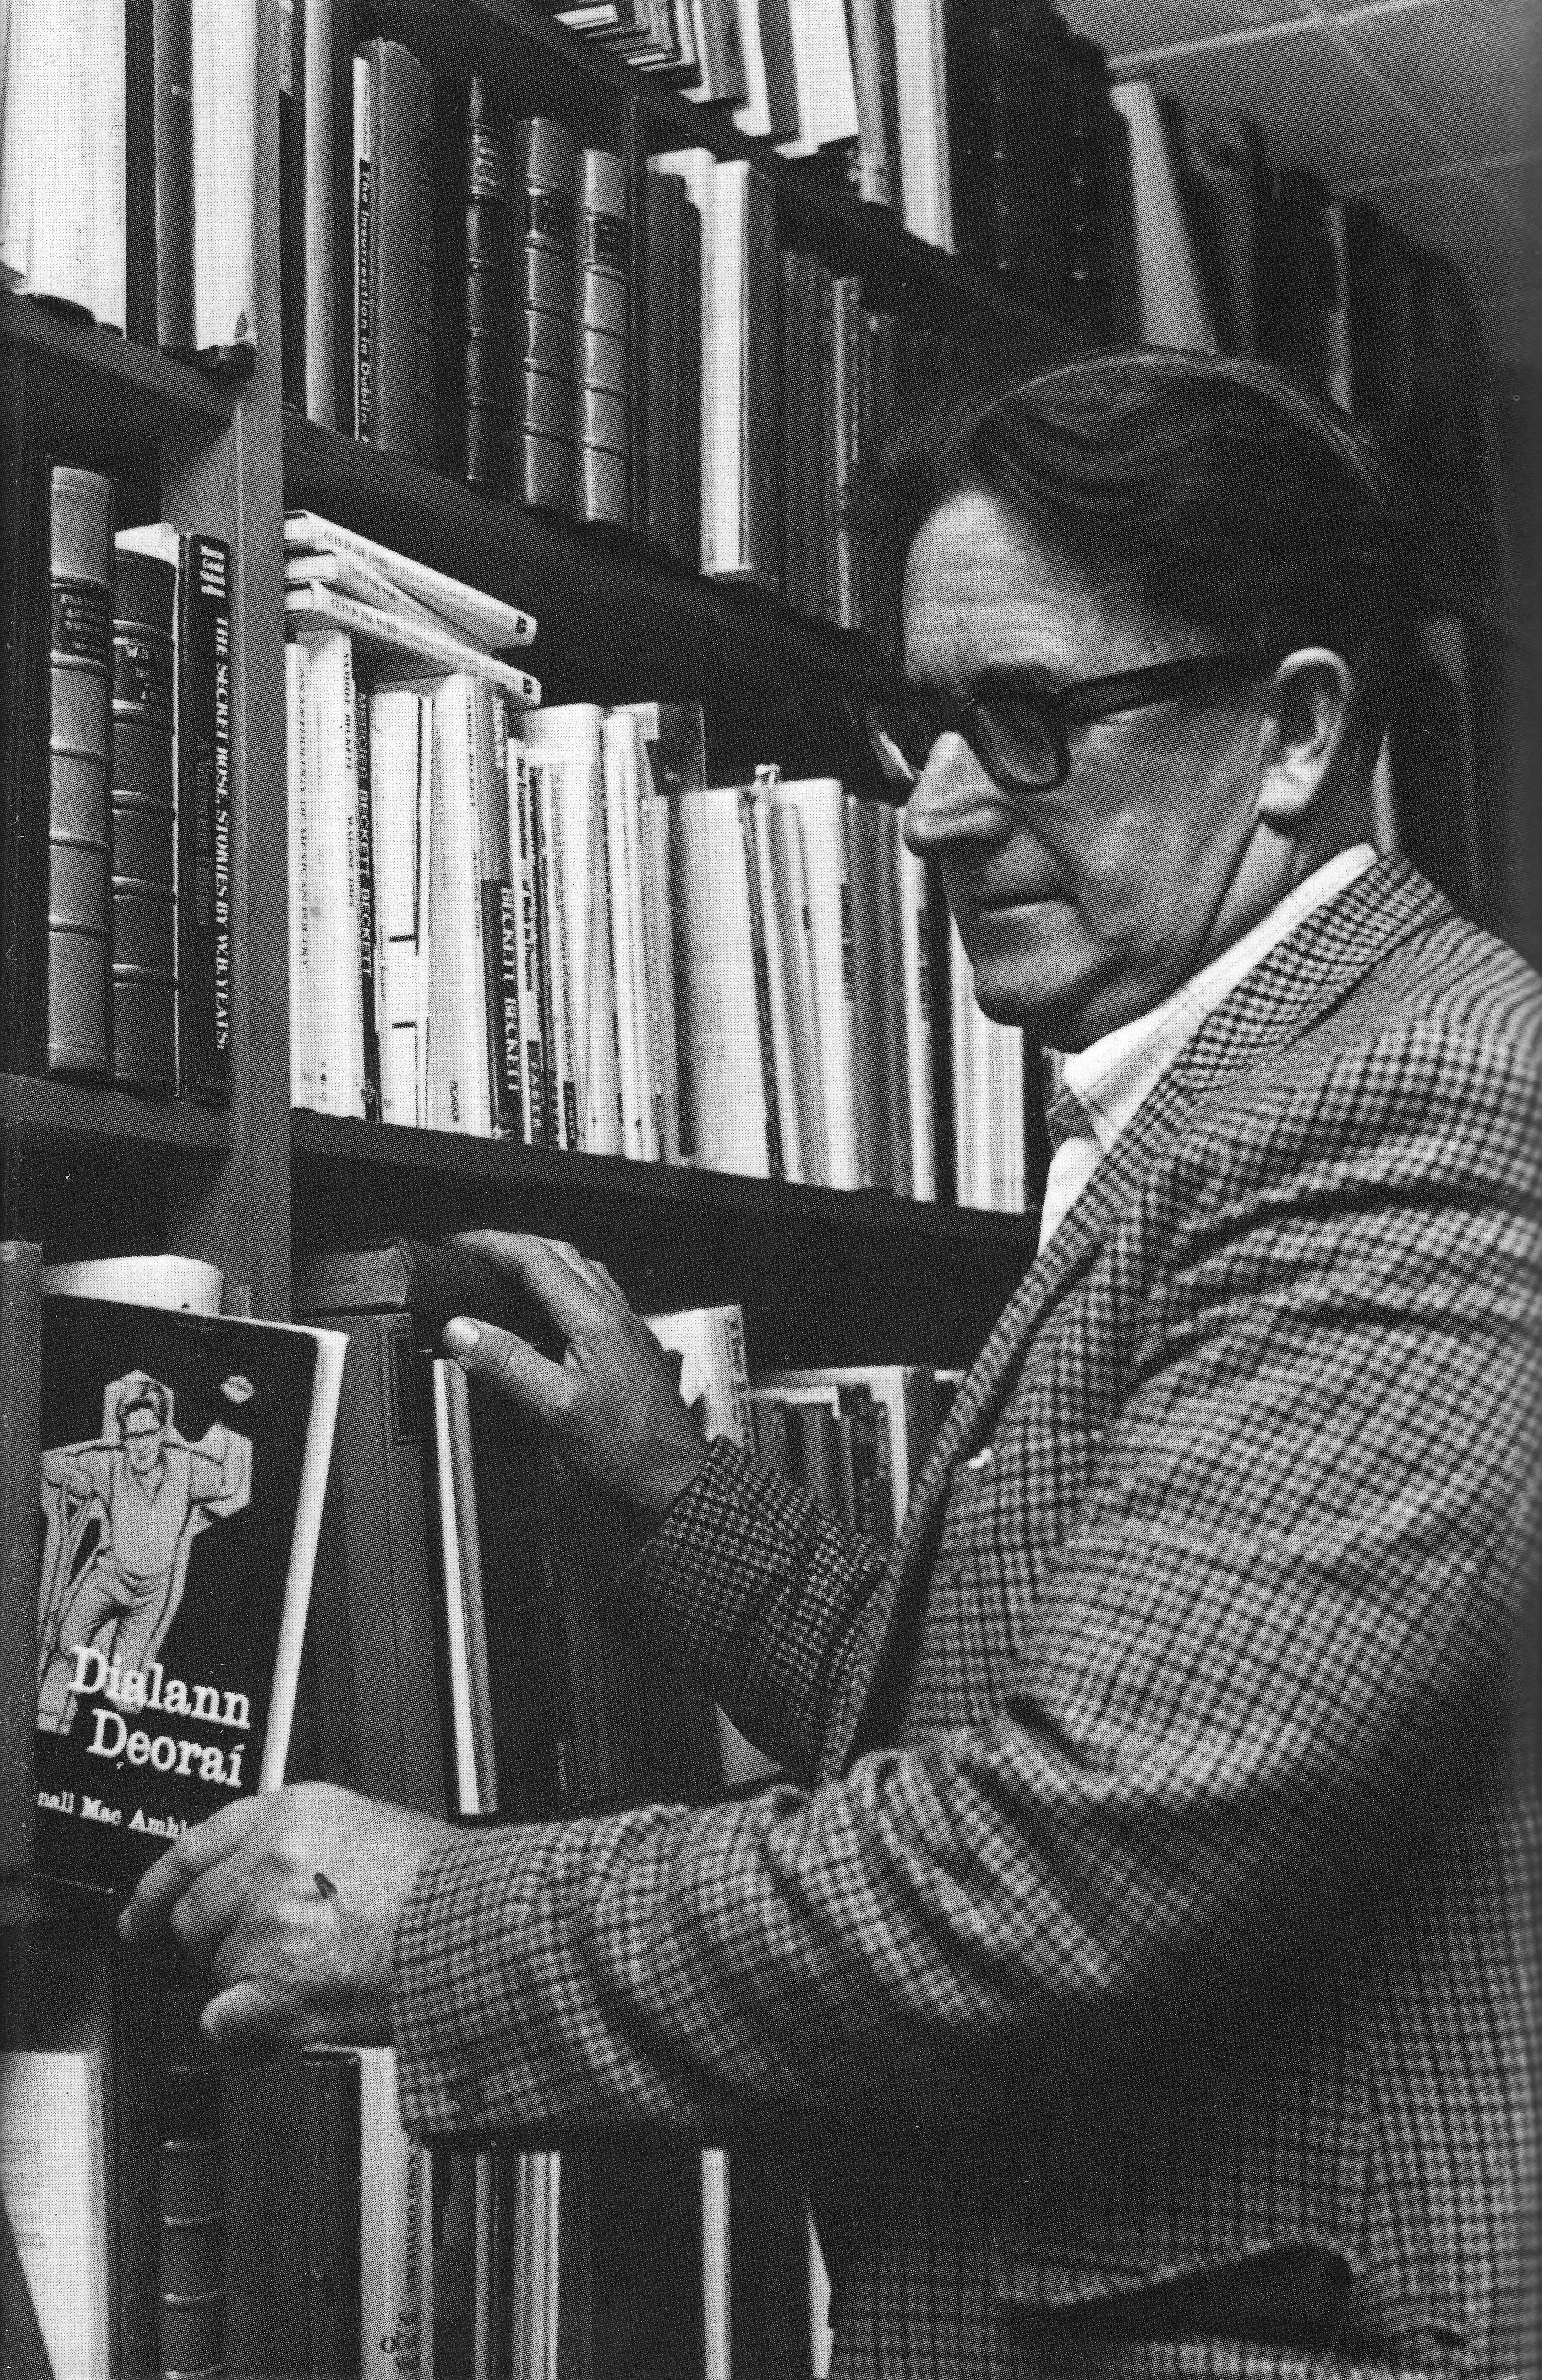 Mac Amhlaigh, as pictured on the cover of his book Schnitzer O'Shea